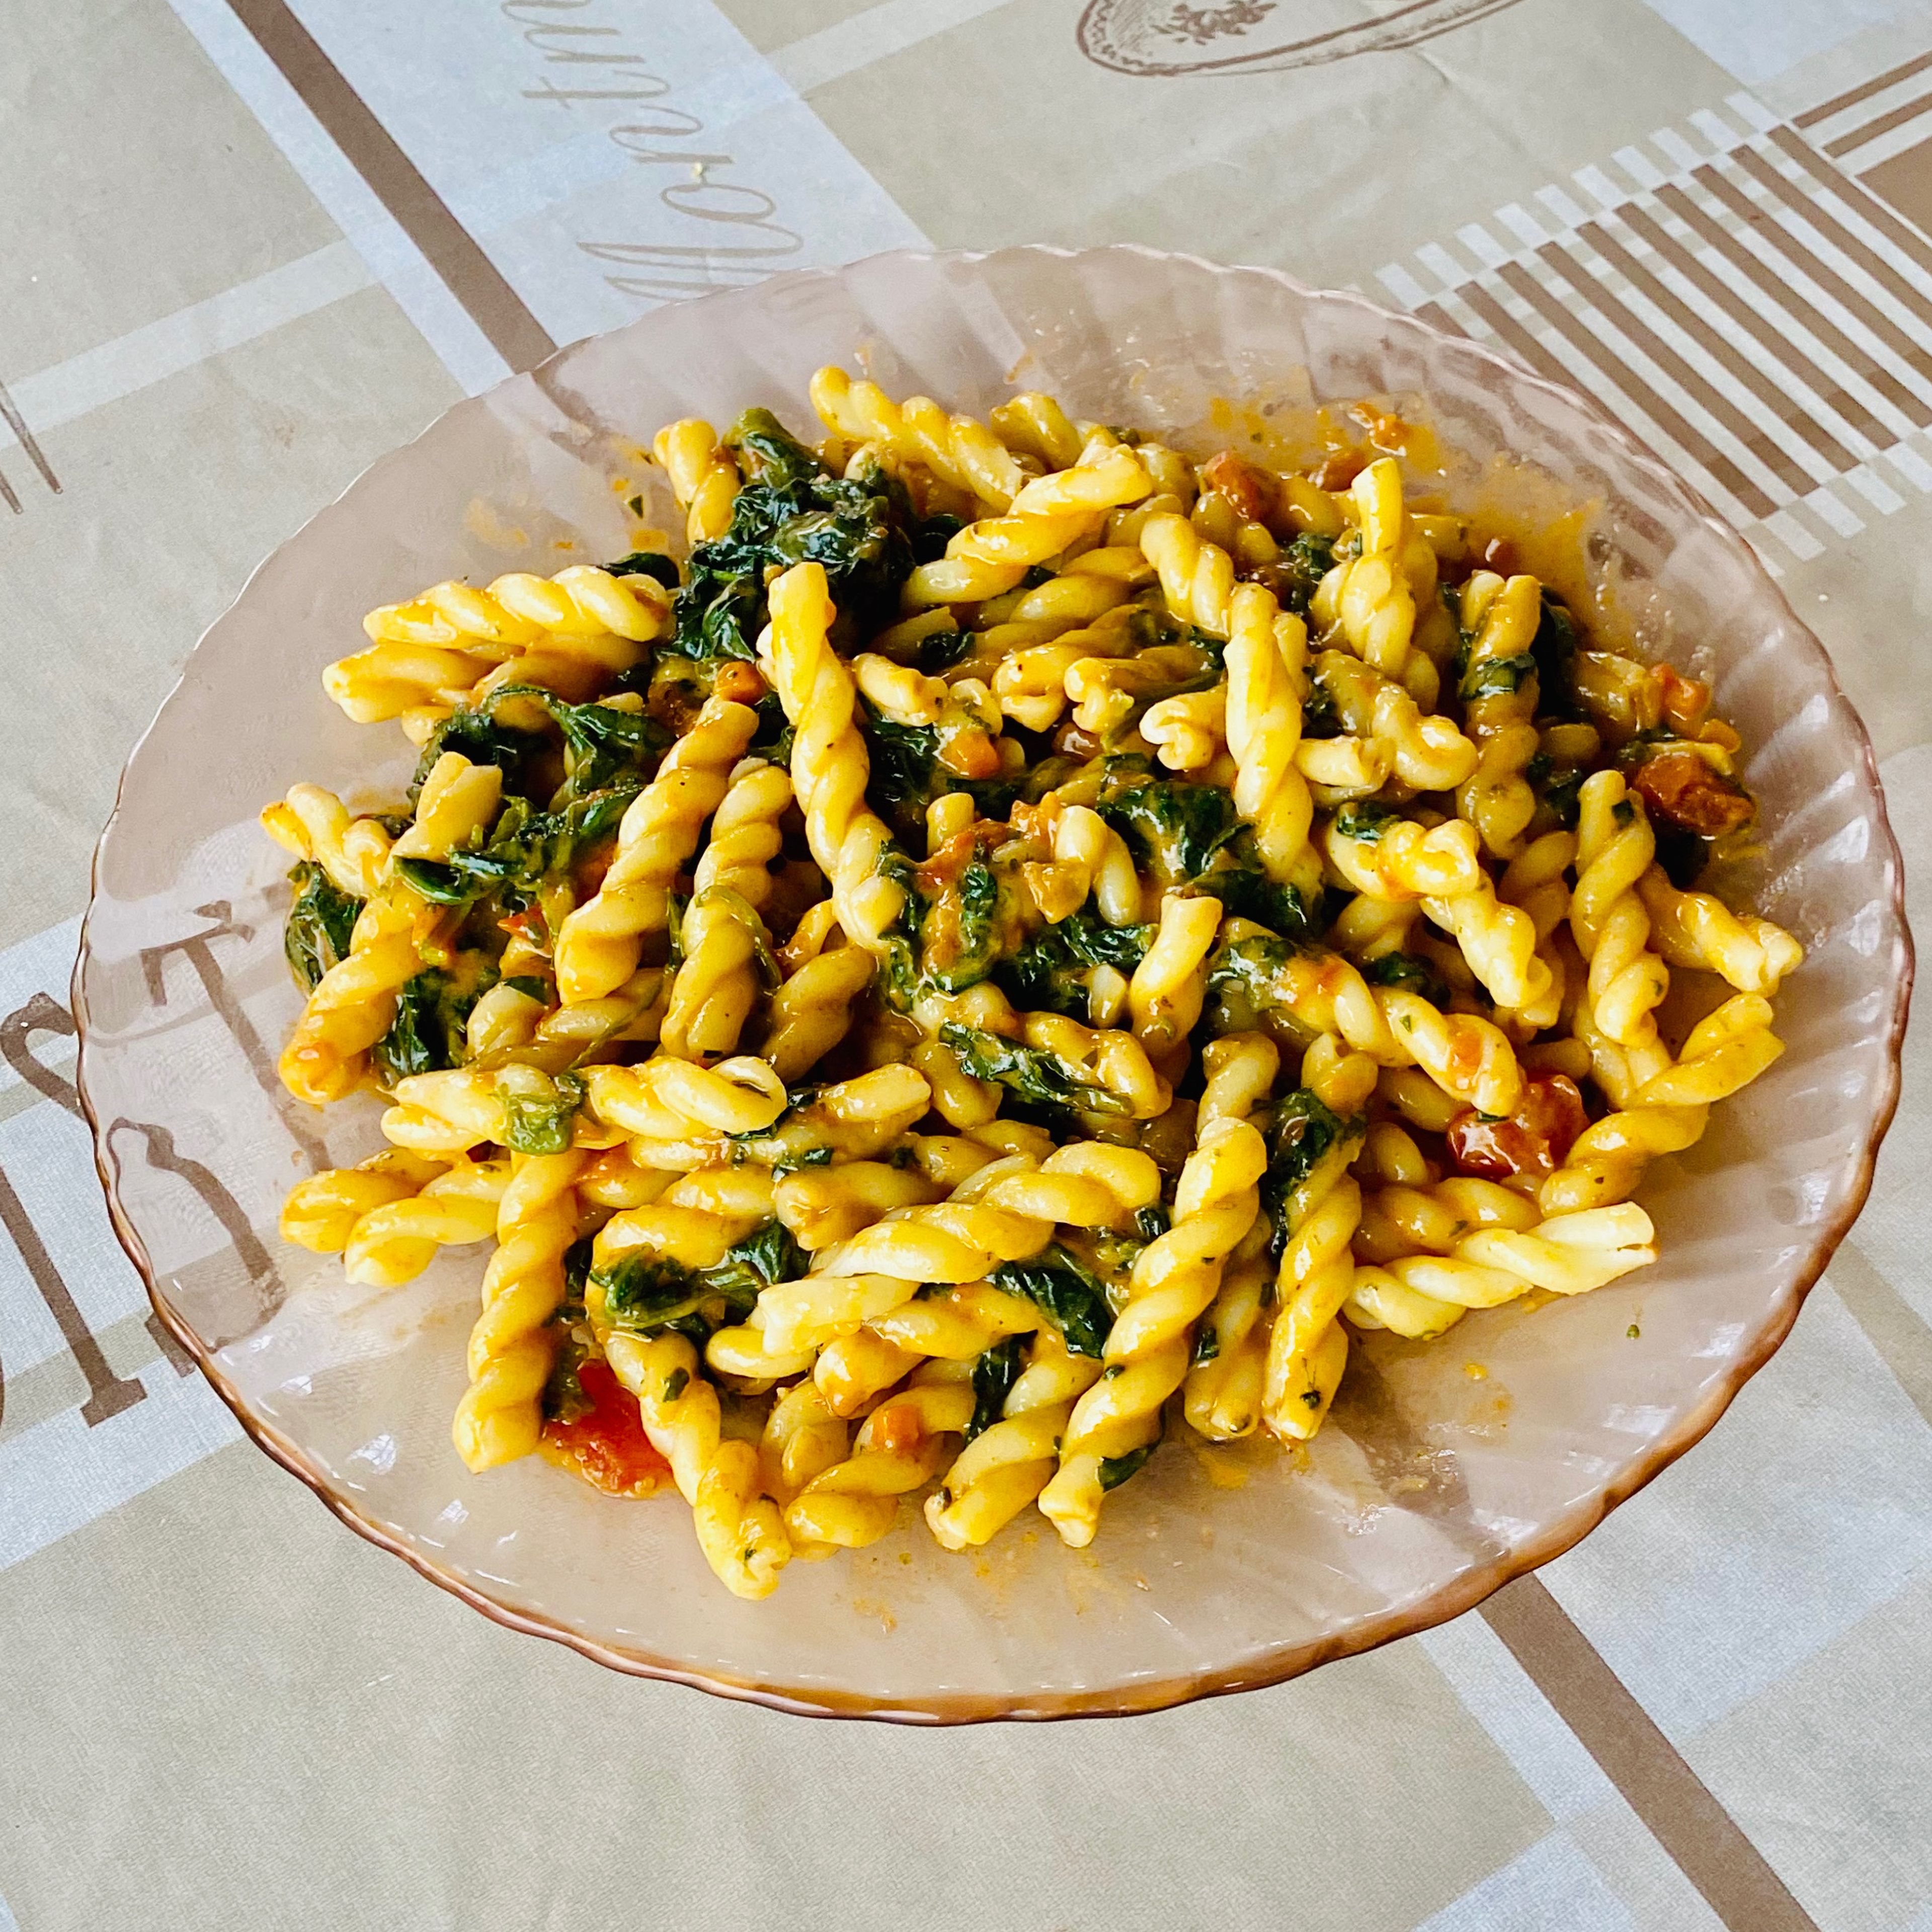 Spinach Pasta with Tomato Sauce